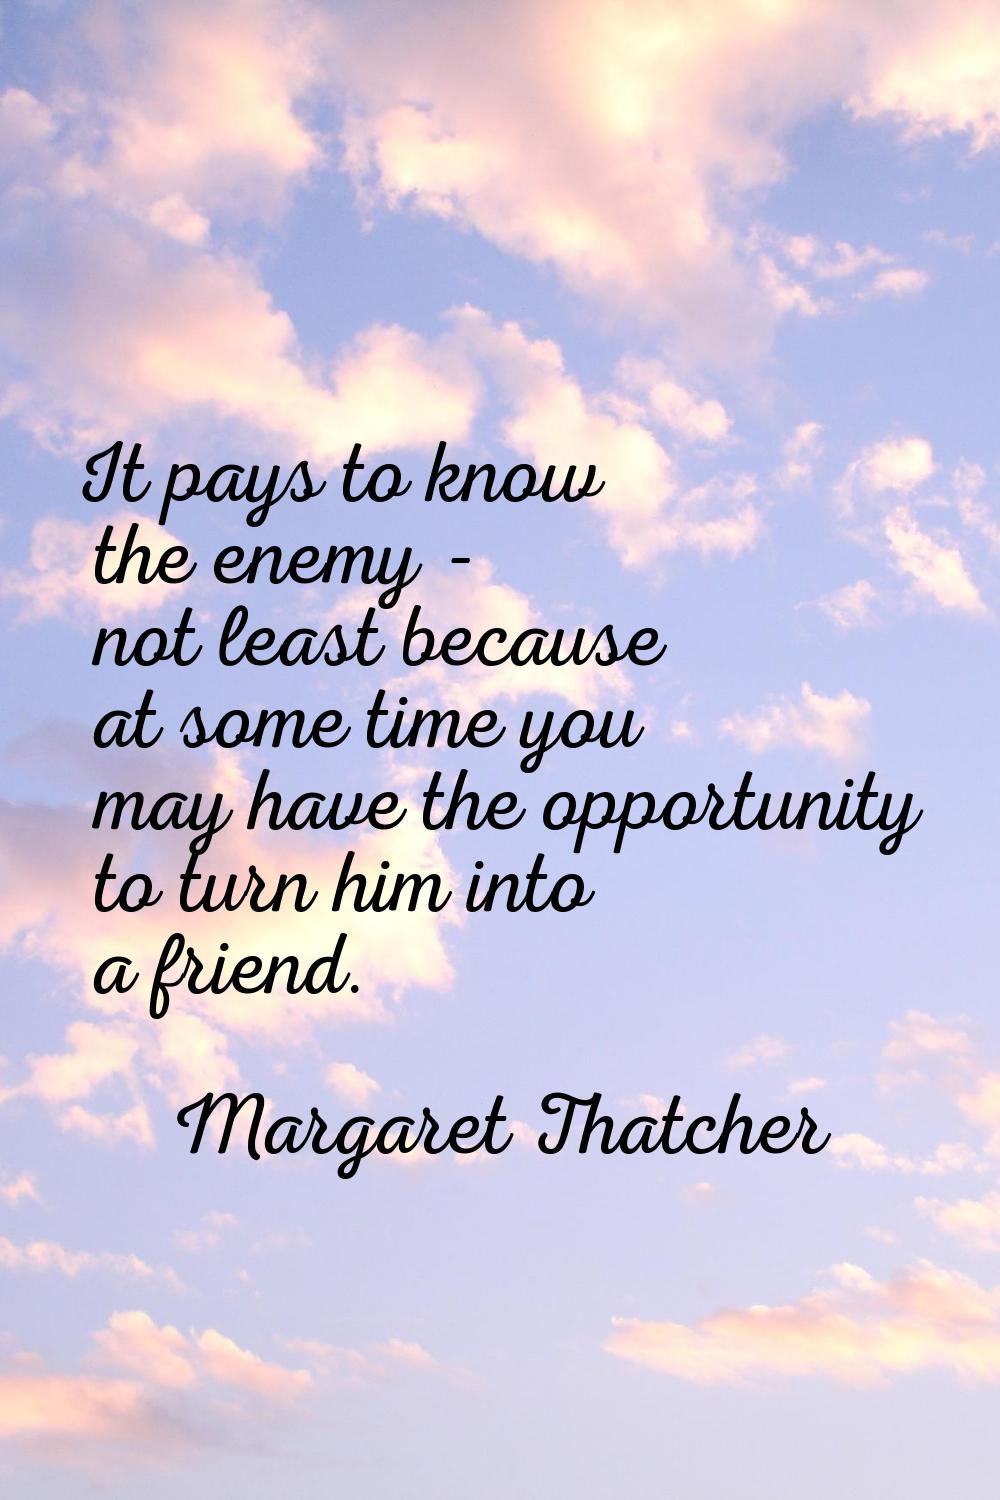 It pays to know the enemy - not least because at some time you may have the opportunity to turn him